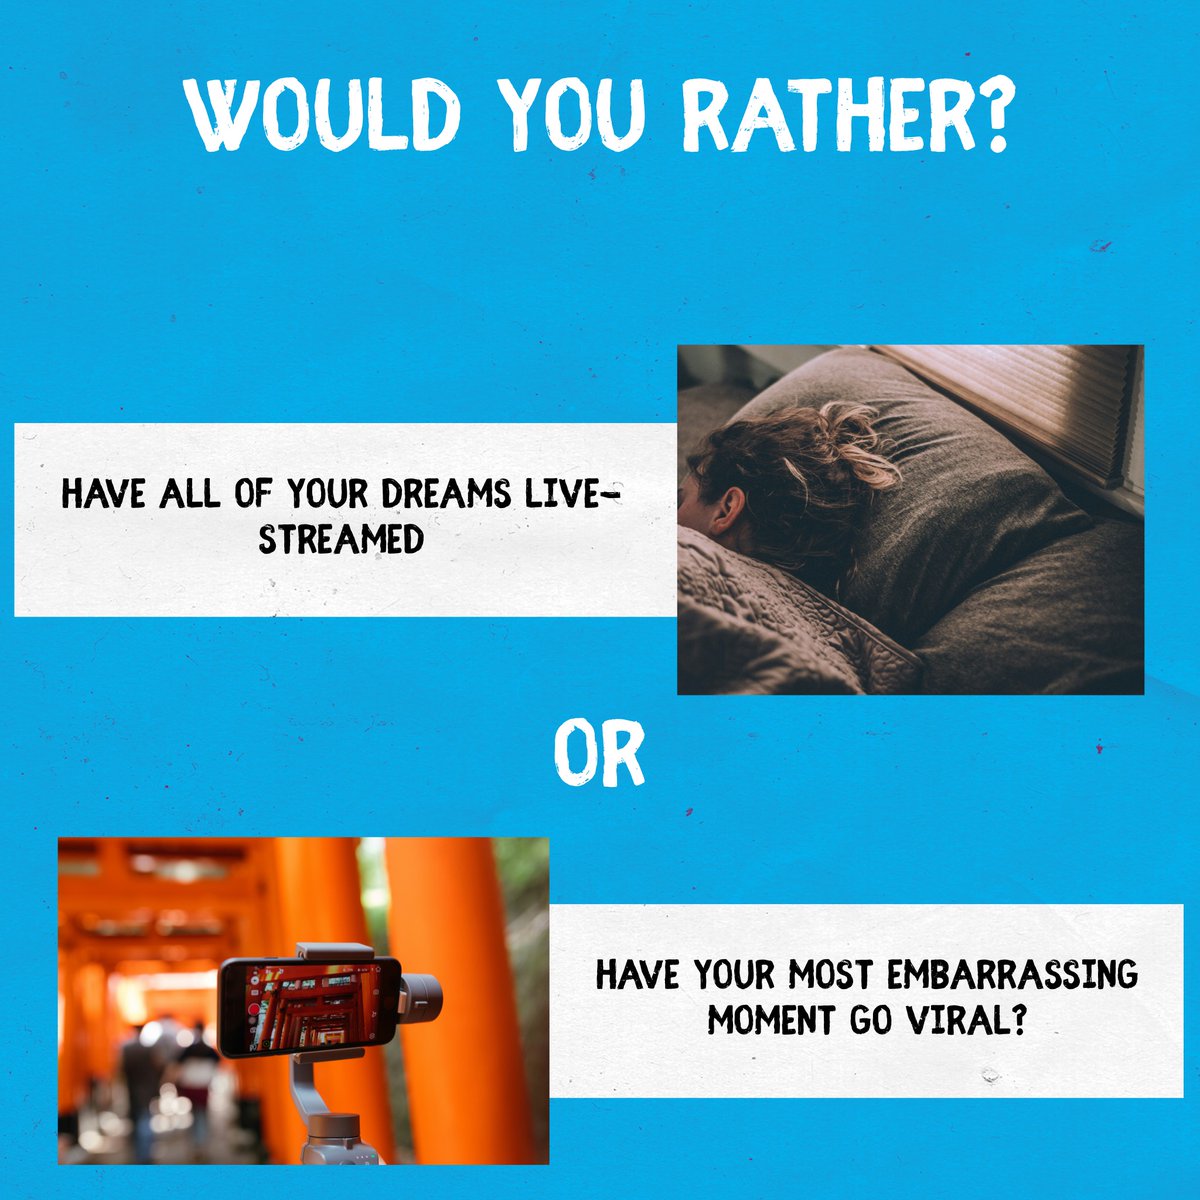 Which would you prefer?  Let us know in the comments below! #acop #americanconsumeropinion #surveysformoney  #wouldyourather